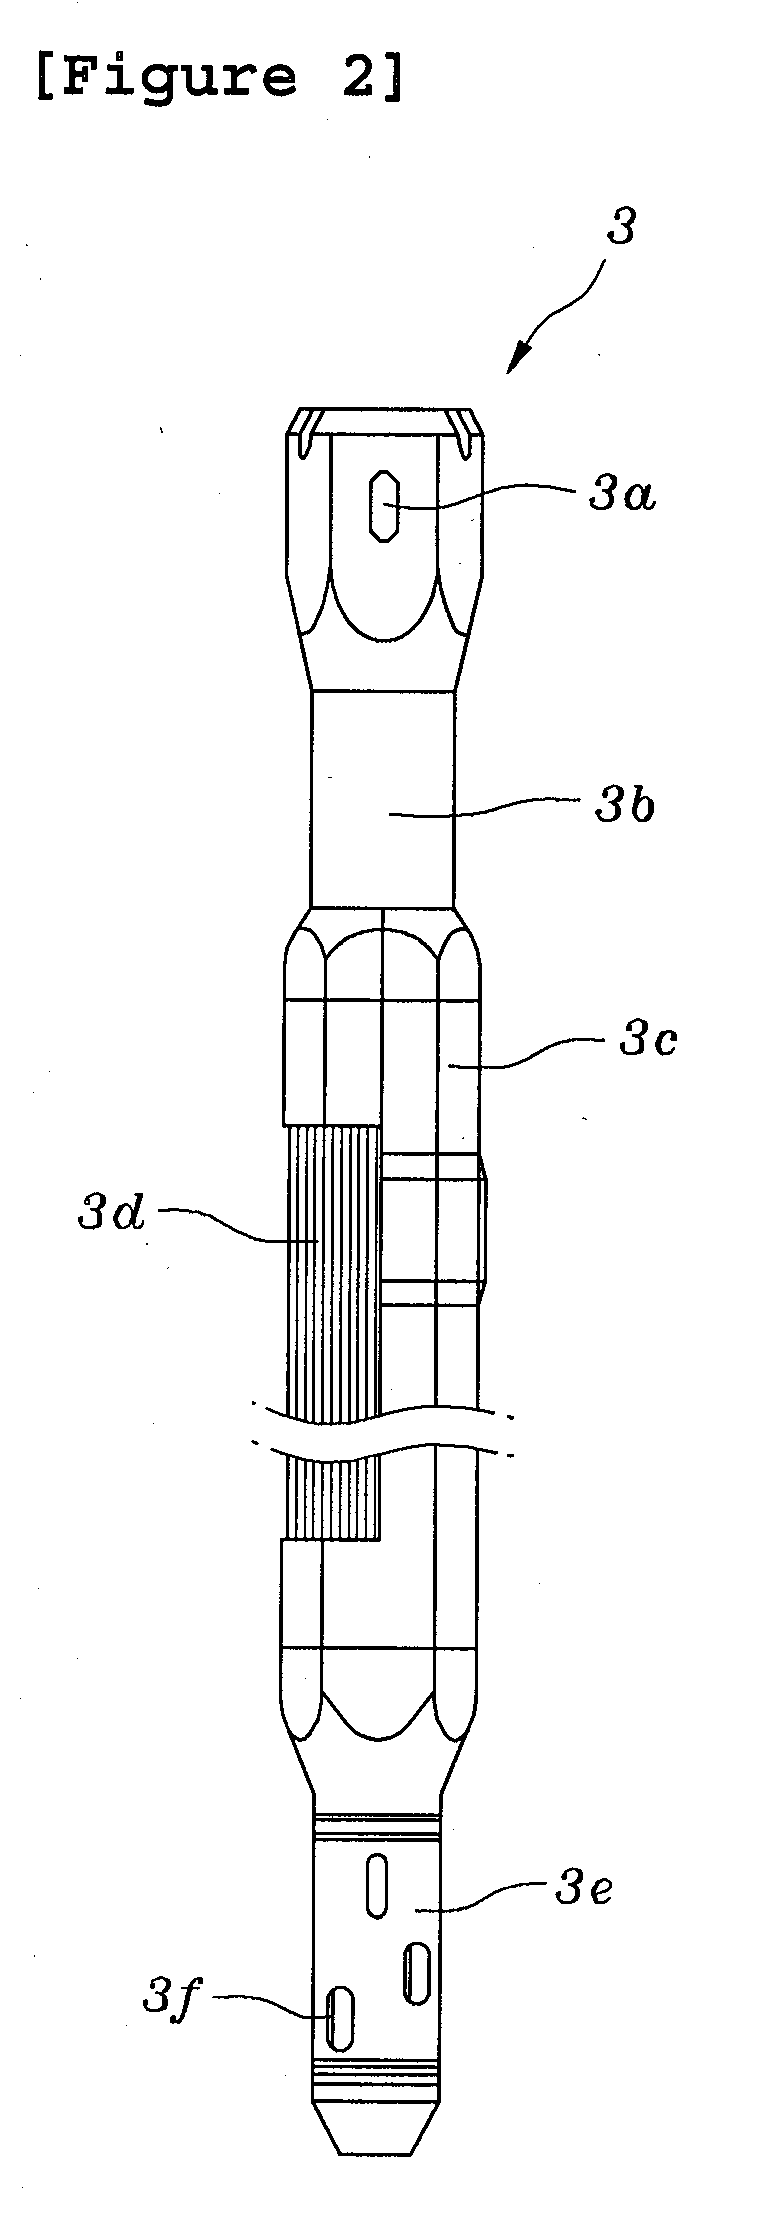 Liquid-metal-cooled fast reactor core comprising nuclear fuel assembly with nuclear fuel rods with varying fuel cladding thickness in each of the reactor core regions